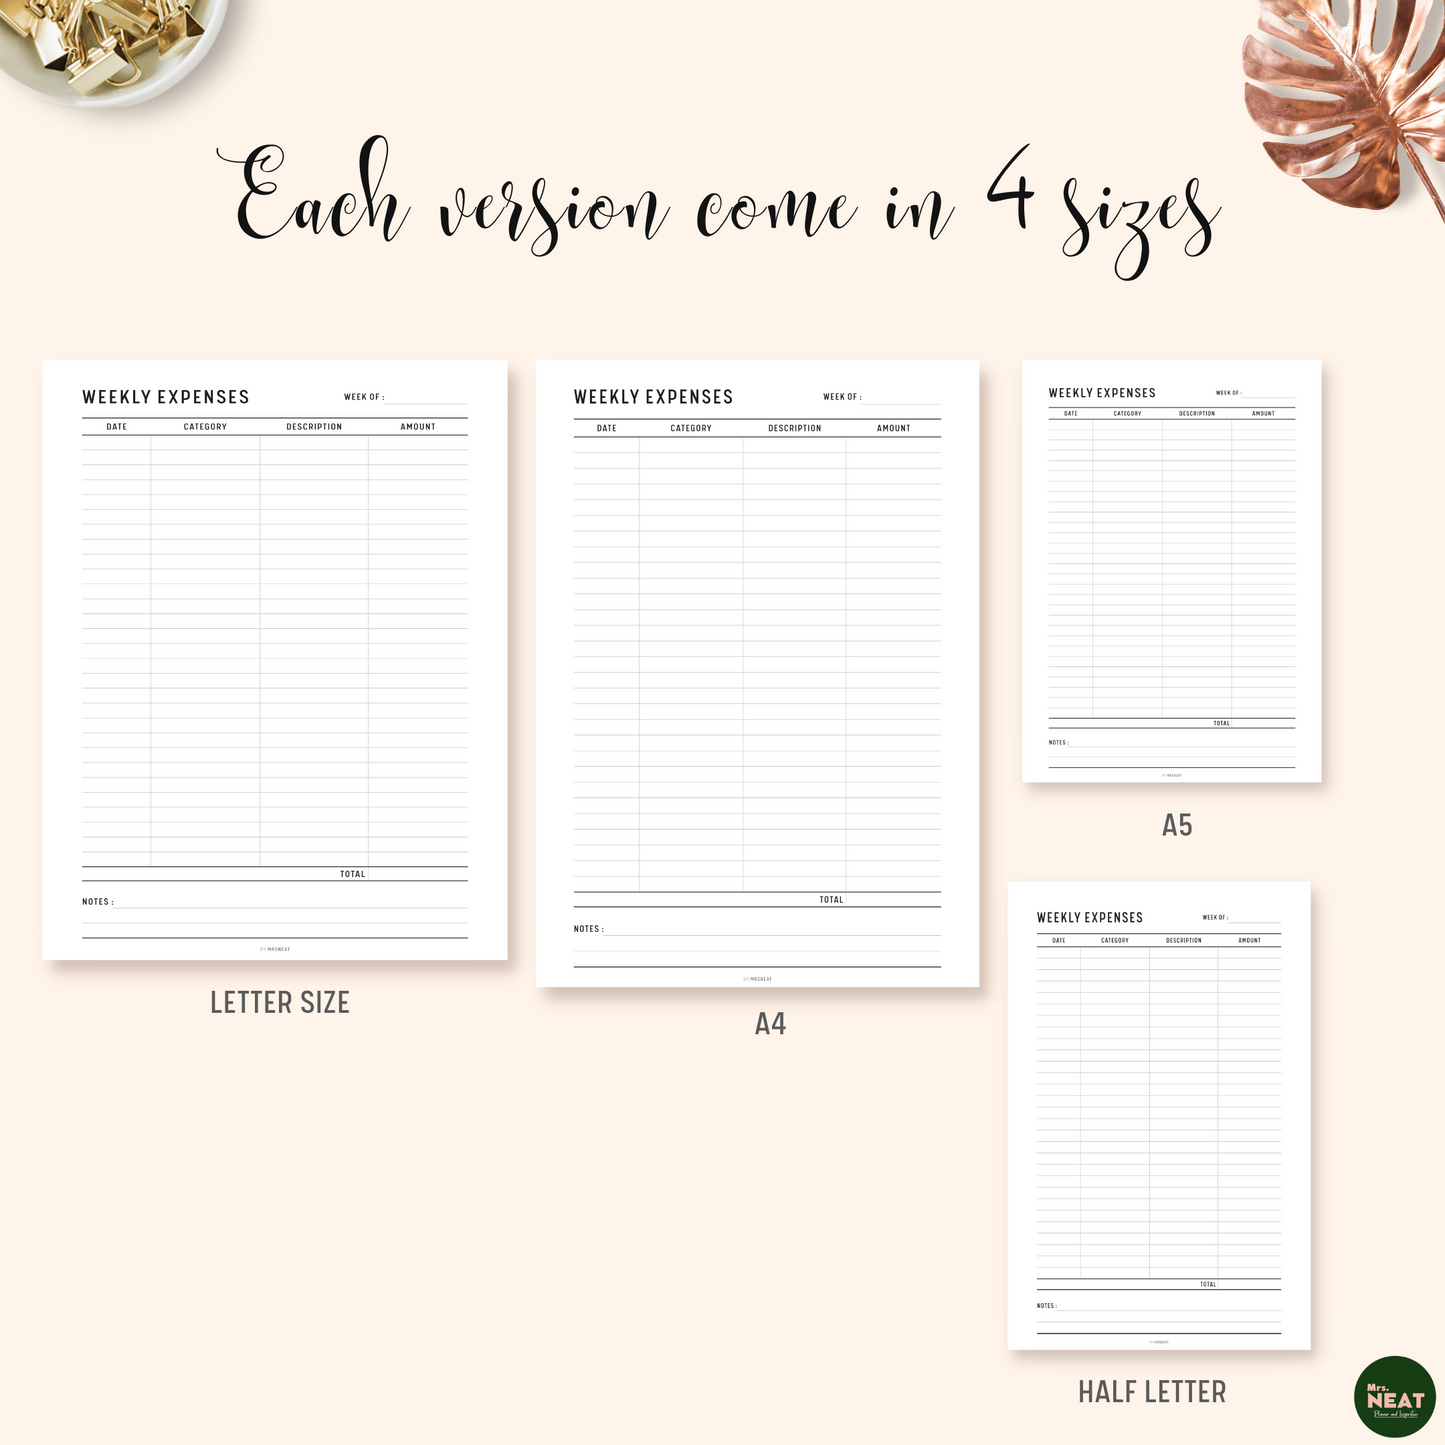 Minimalist Weekly Expenses Tracker Planner Printable in A4, A5, Letter and Half Letter size